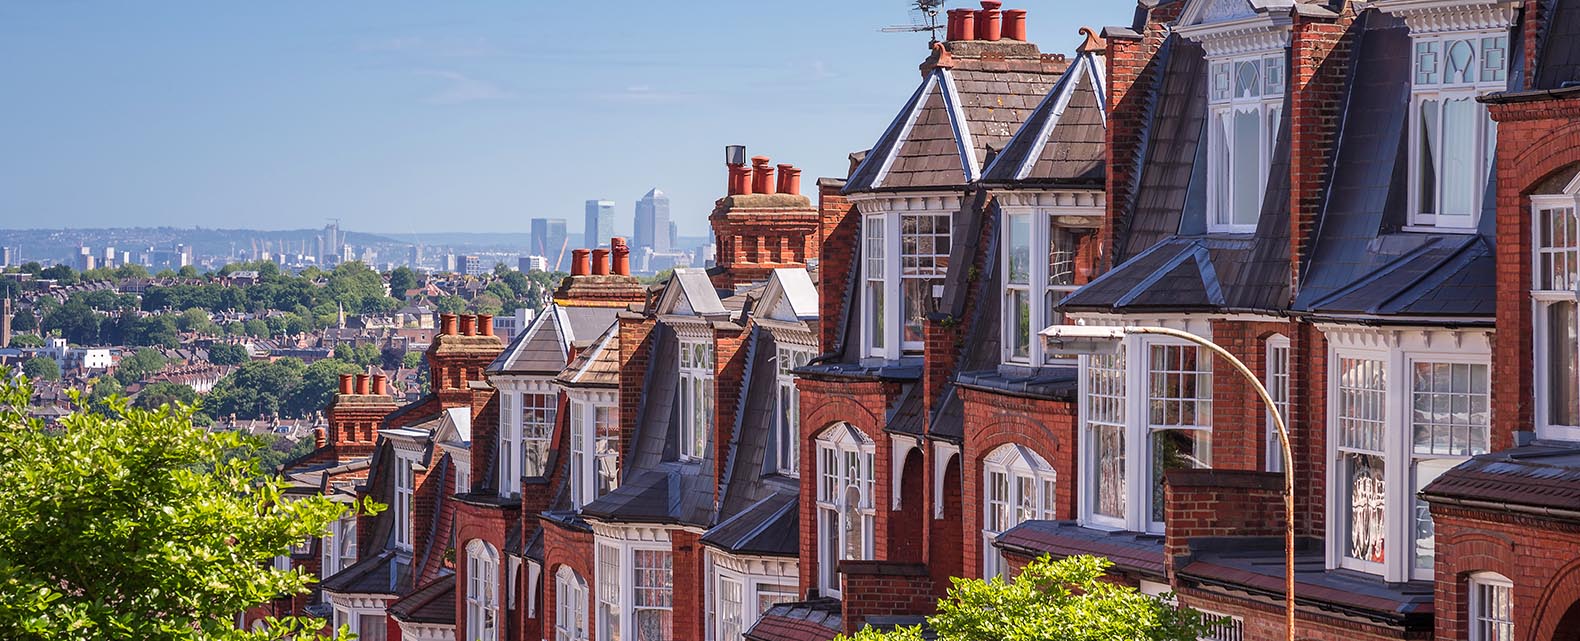 London terraced Victorian houses viewed from top of a suburban hill